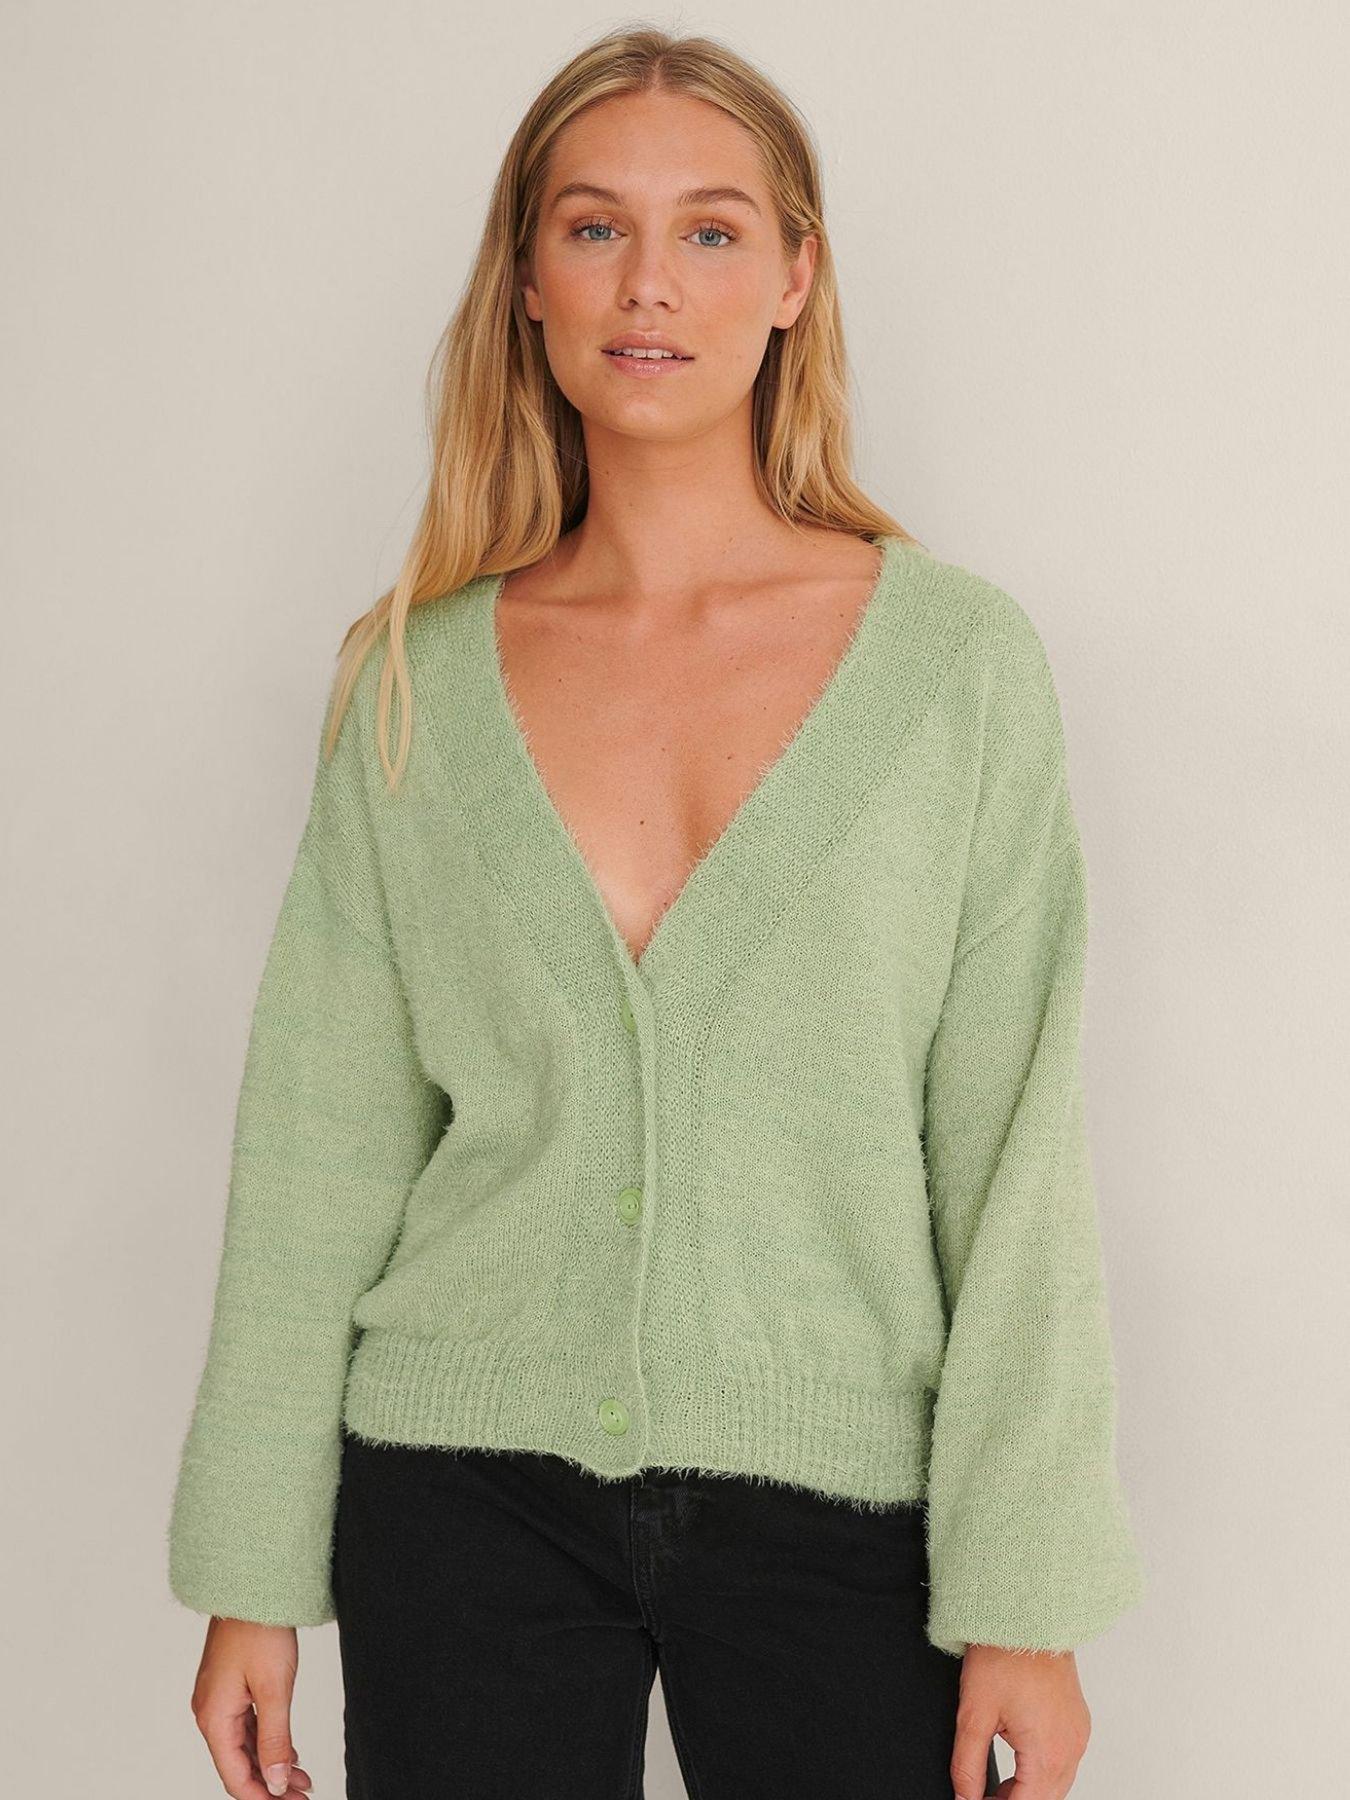  Oversized Knitted Cardigan - Green